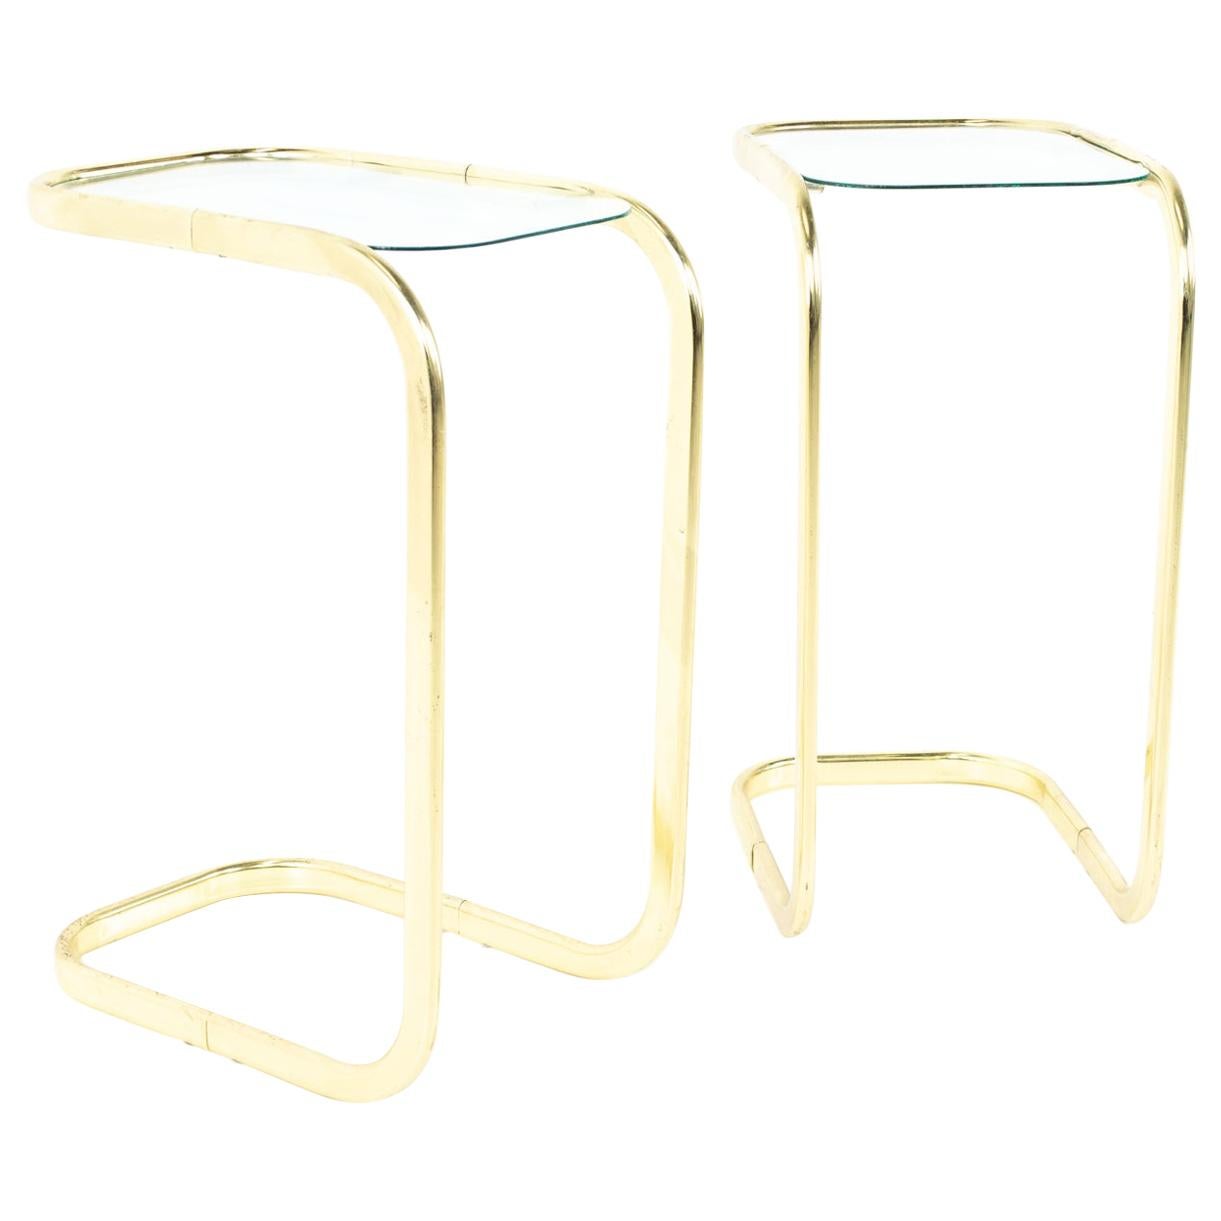 Milo Baughman Style Brass and Glass Cantilever Side End Tables, Pair For Sale